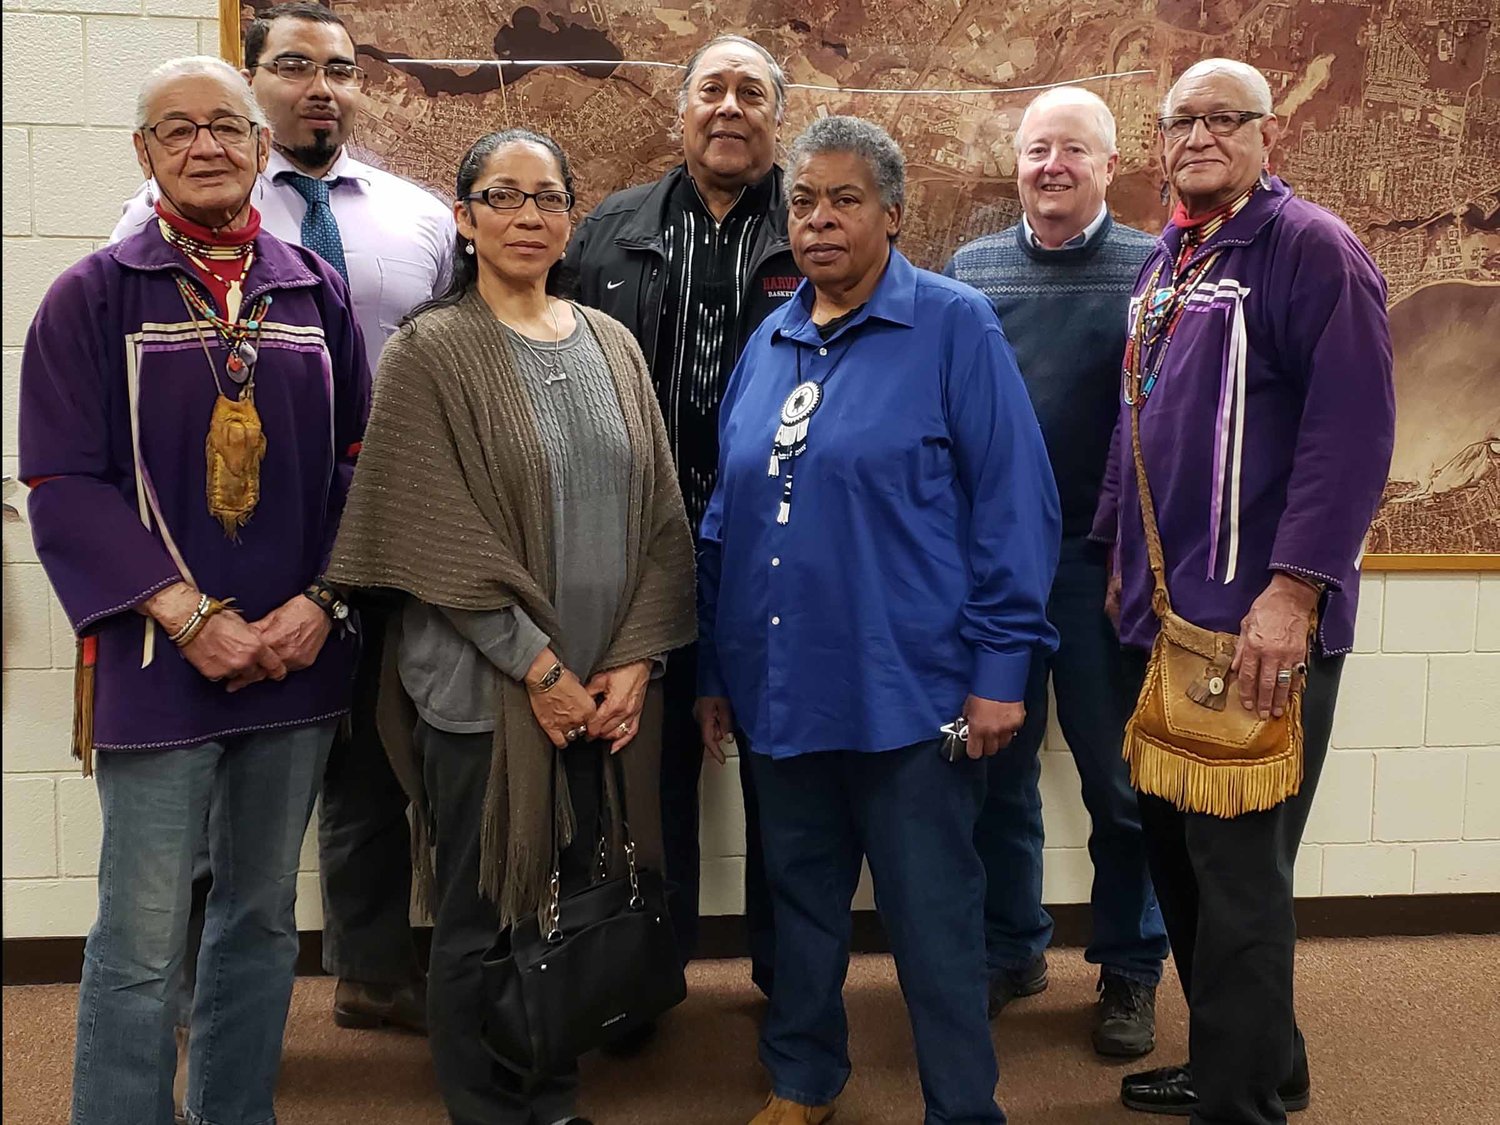 Members of the Pokanoket Massasoit Ousamequin who attended the April 5 City Council meeting acknowledging East Providence as the tribe’s ancestral home in the Sowams area included (from left to right) Lee “Brave Heart” Edmonds, Donald “Strong Turtle” Brown, Tracey “Dancing Star” Brown, Dr. William “Winds of Thunder” Guy, Elsie “Sunflower” Morrison, Dr. David Weed and Harry “Hawk” Edmonds.